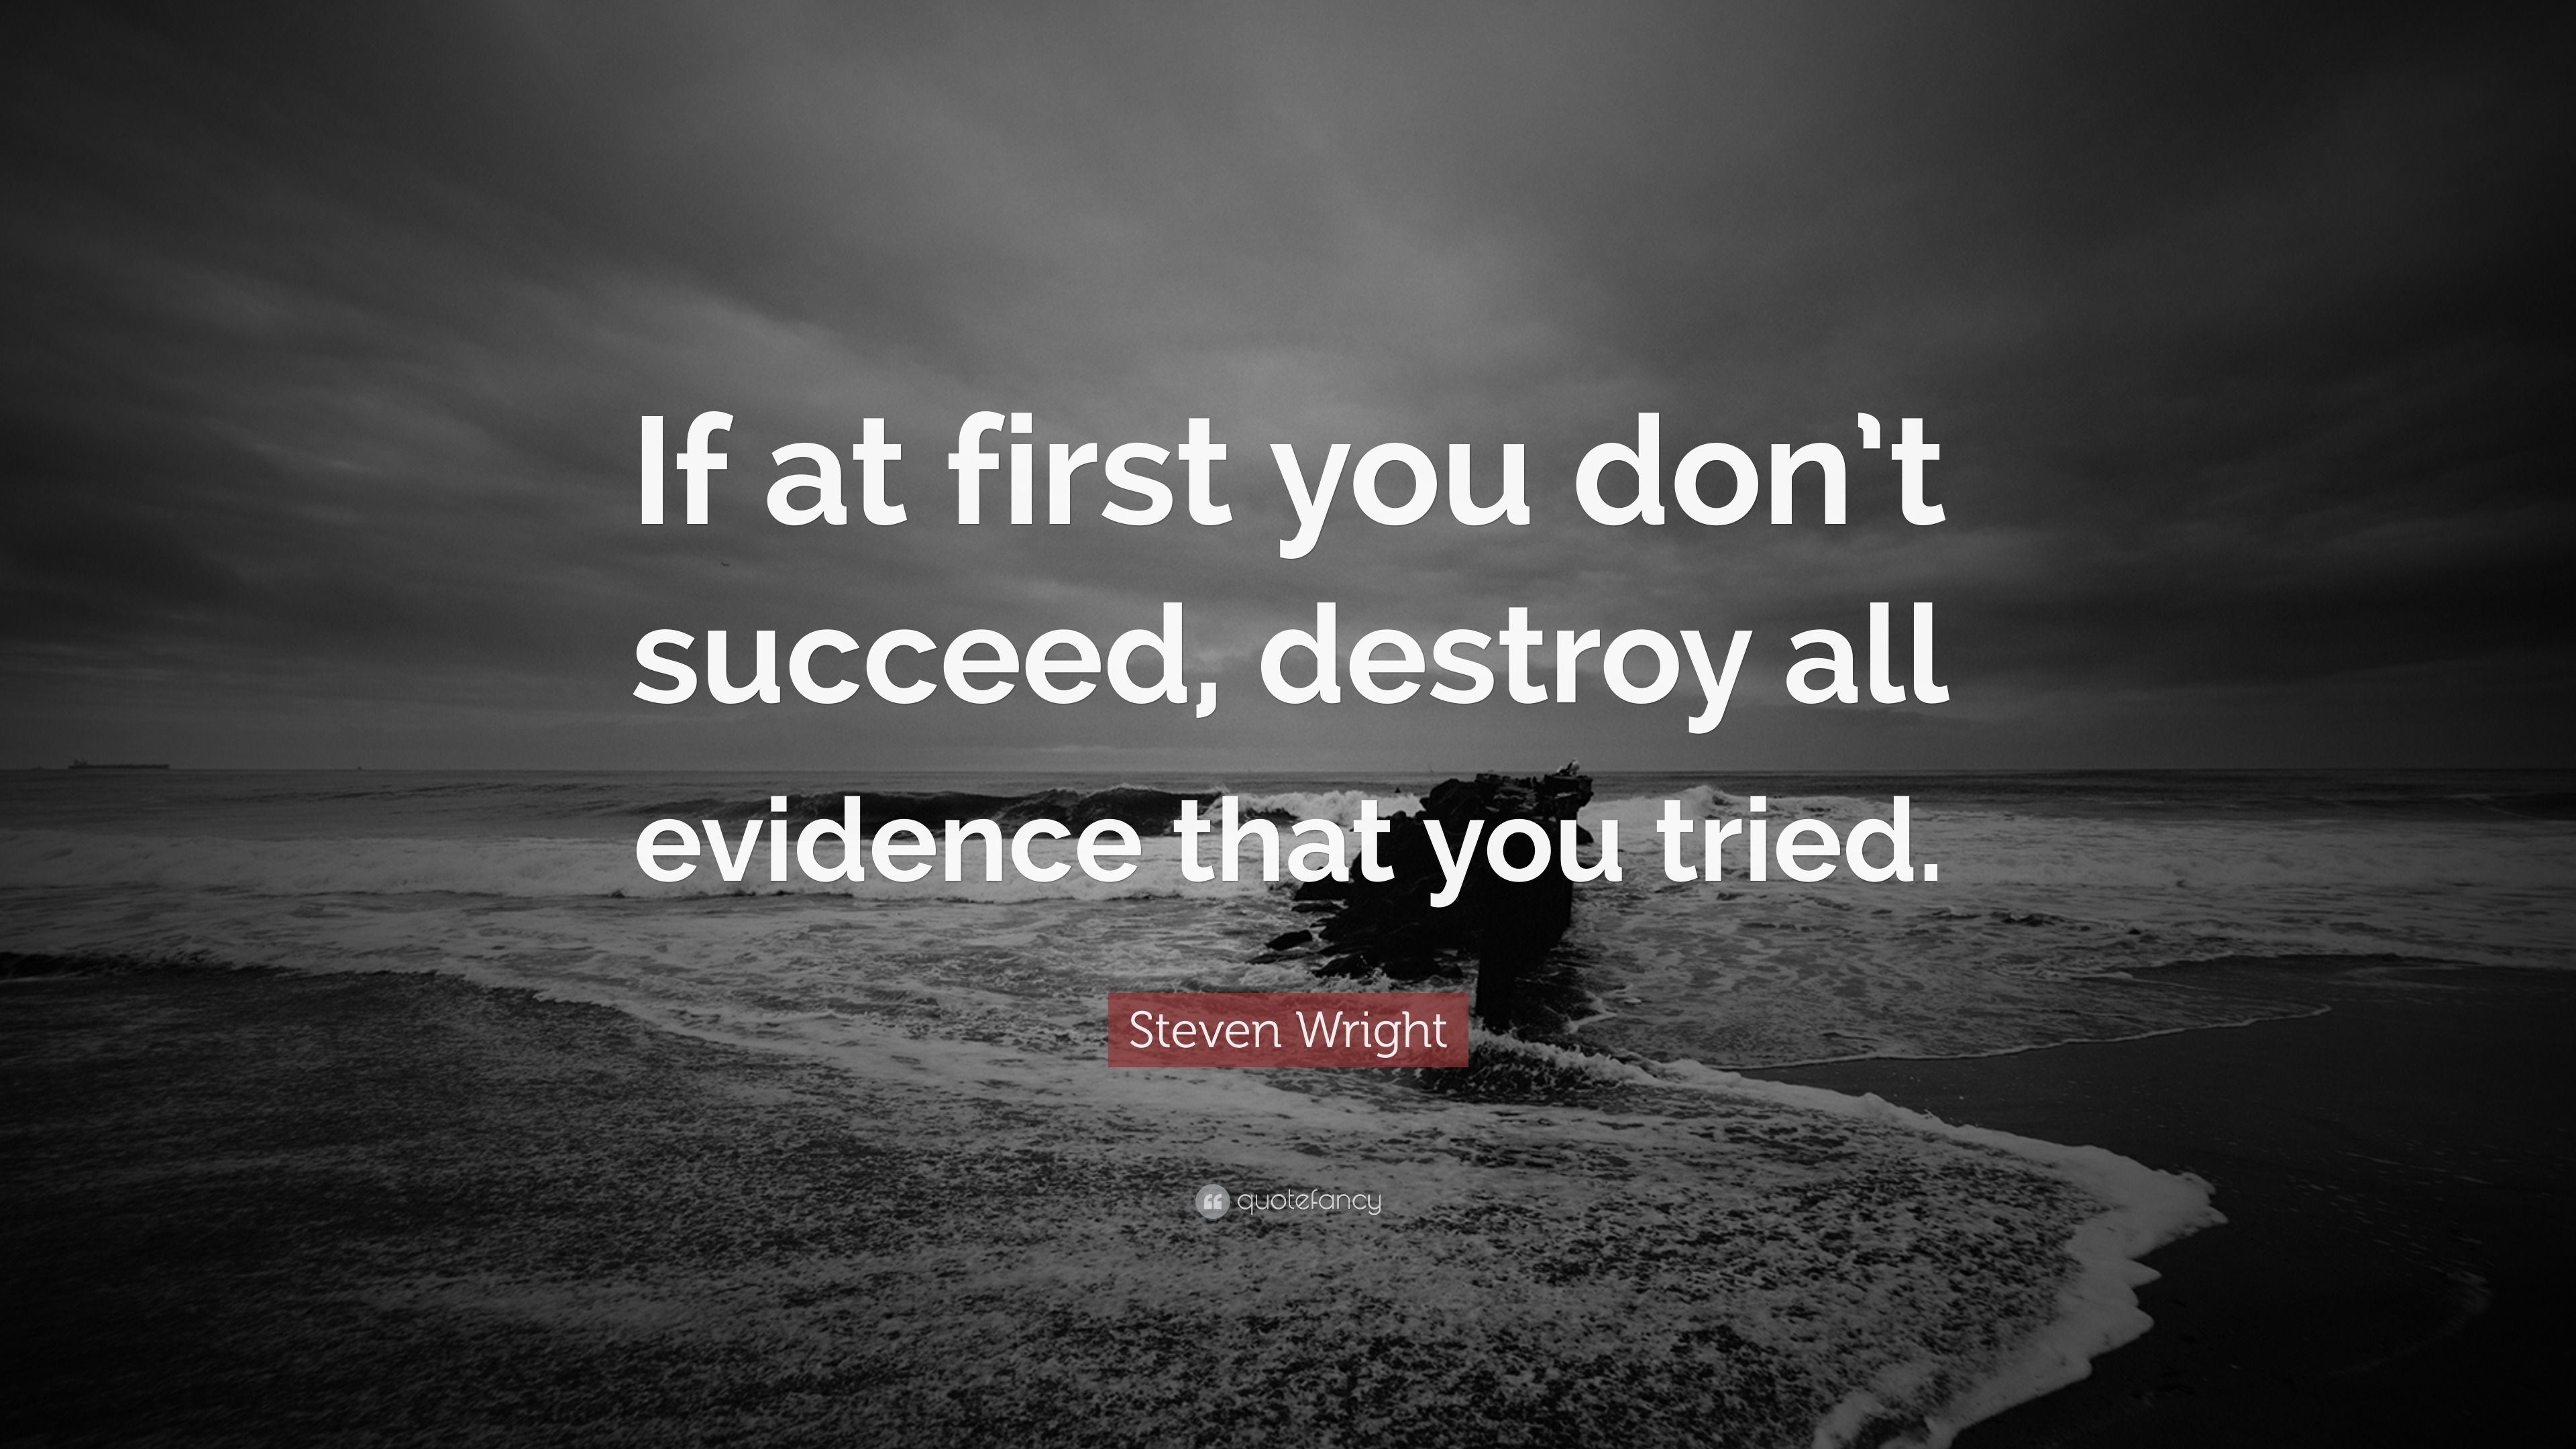 Steven Wright Quote: “If at first you don’t succeed, destroy all